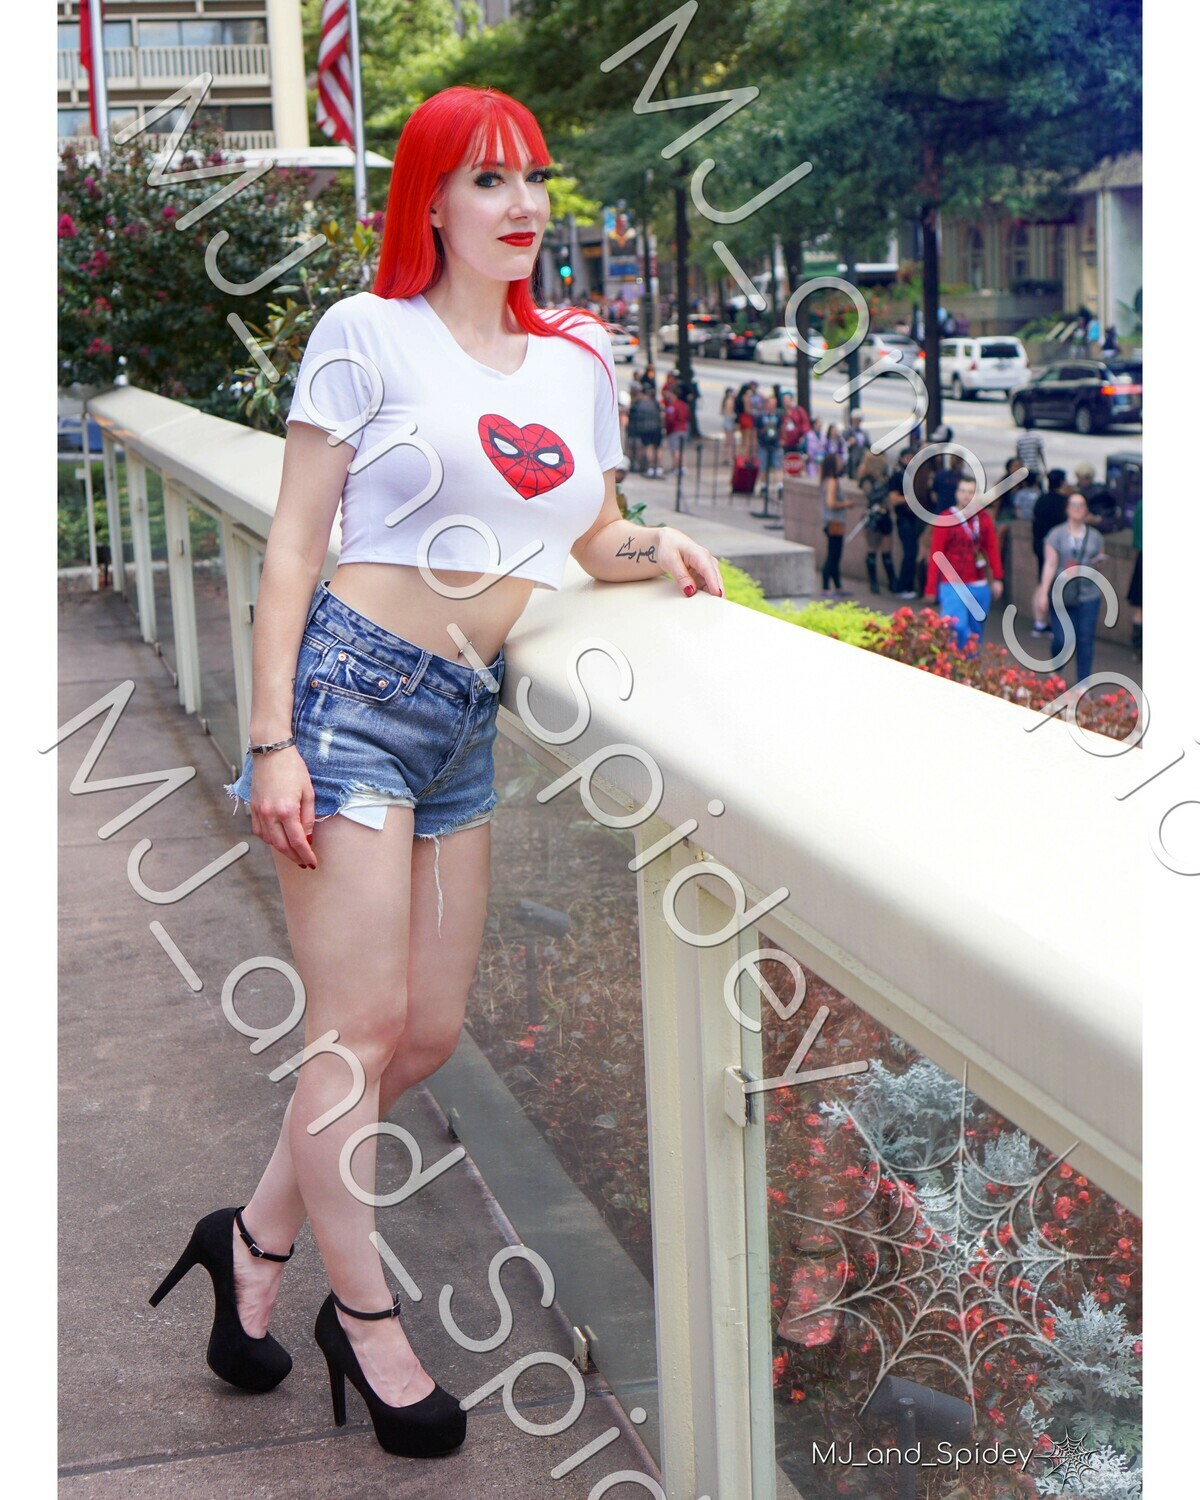 Marvel - Spider-Man - Mary Jane Watson - Classic 6 -  Cosplay Print (@MJ_and_Spidey, MJ and Spidey, Comics)